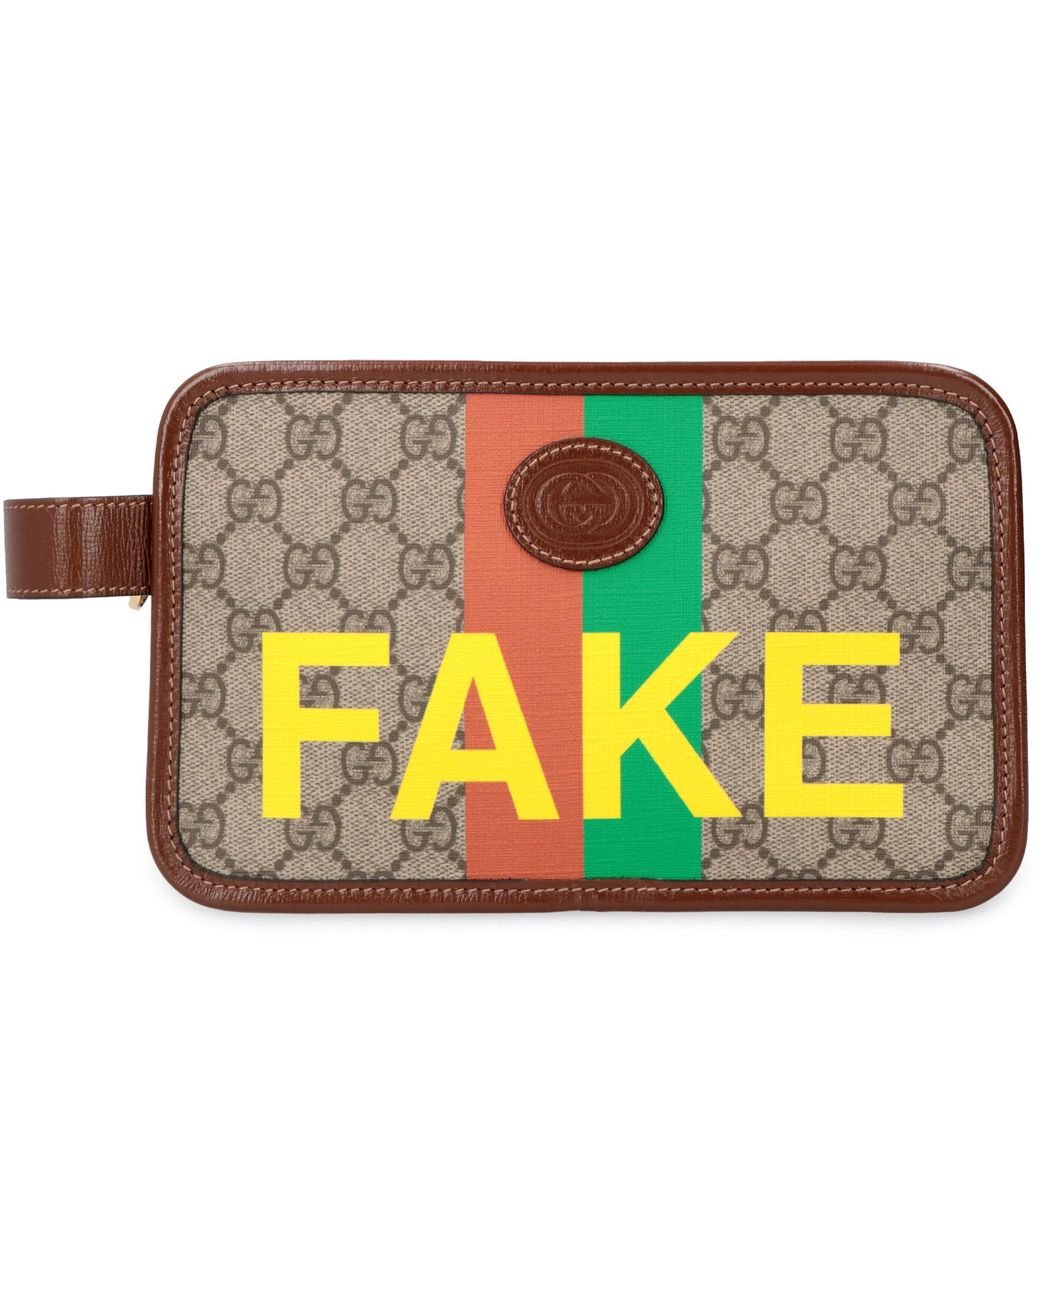 Gucci 'fake/not' Print Cosmetic Case in Natural for Men